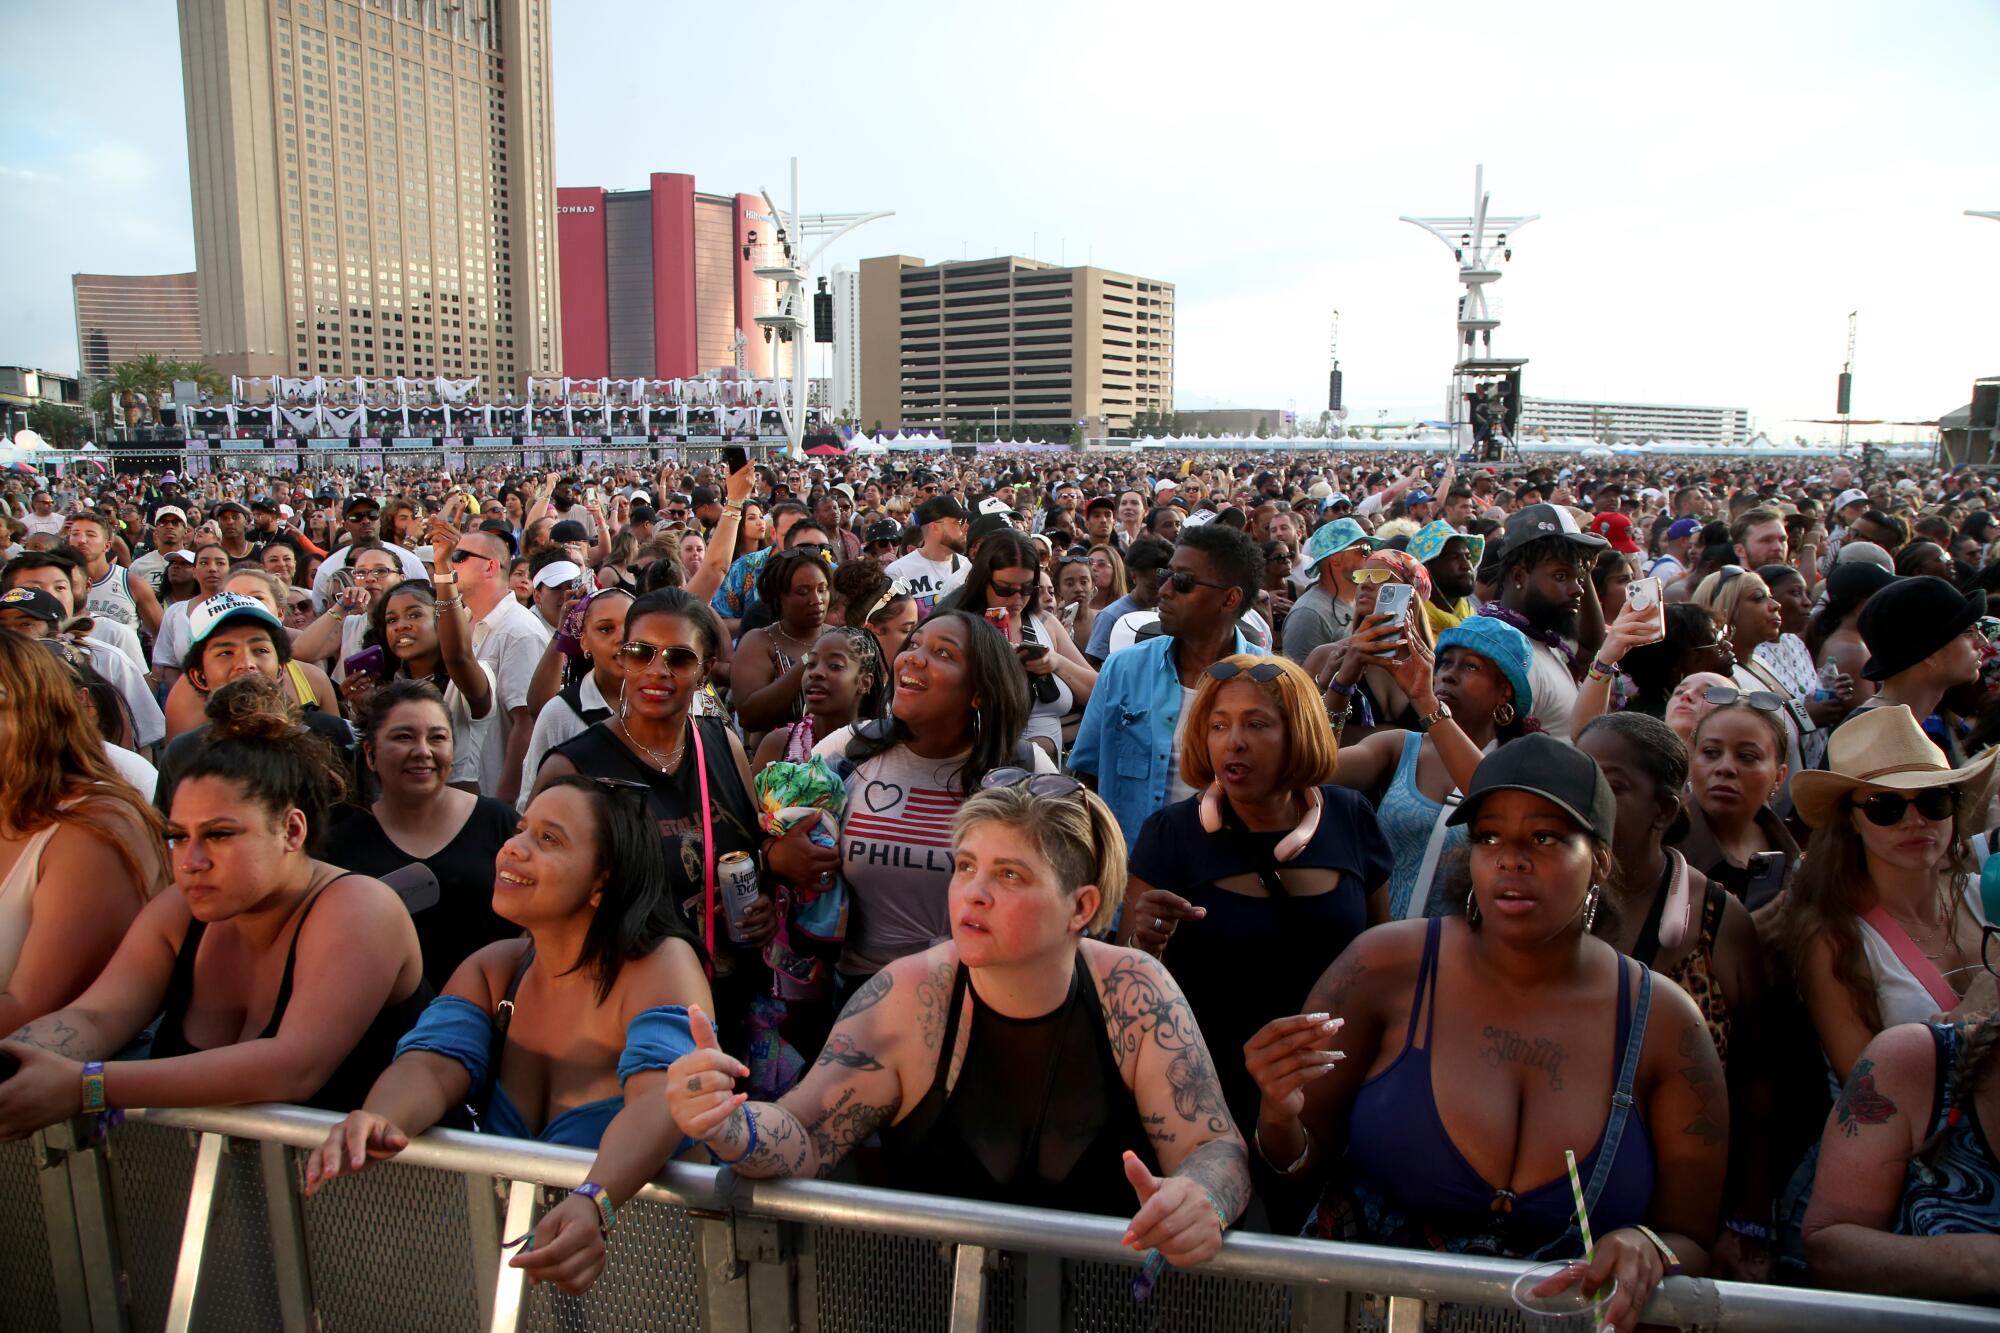 Fans at the Lovers & Friends music festival at the Las Vegas Festival Grounds on May 15, 2022.